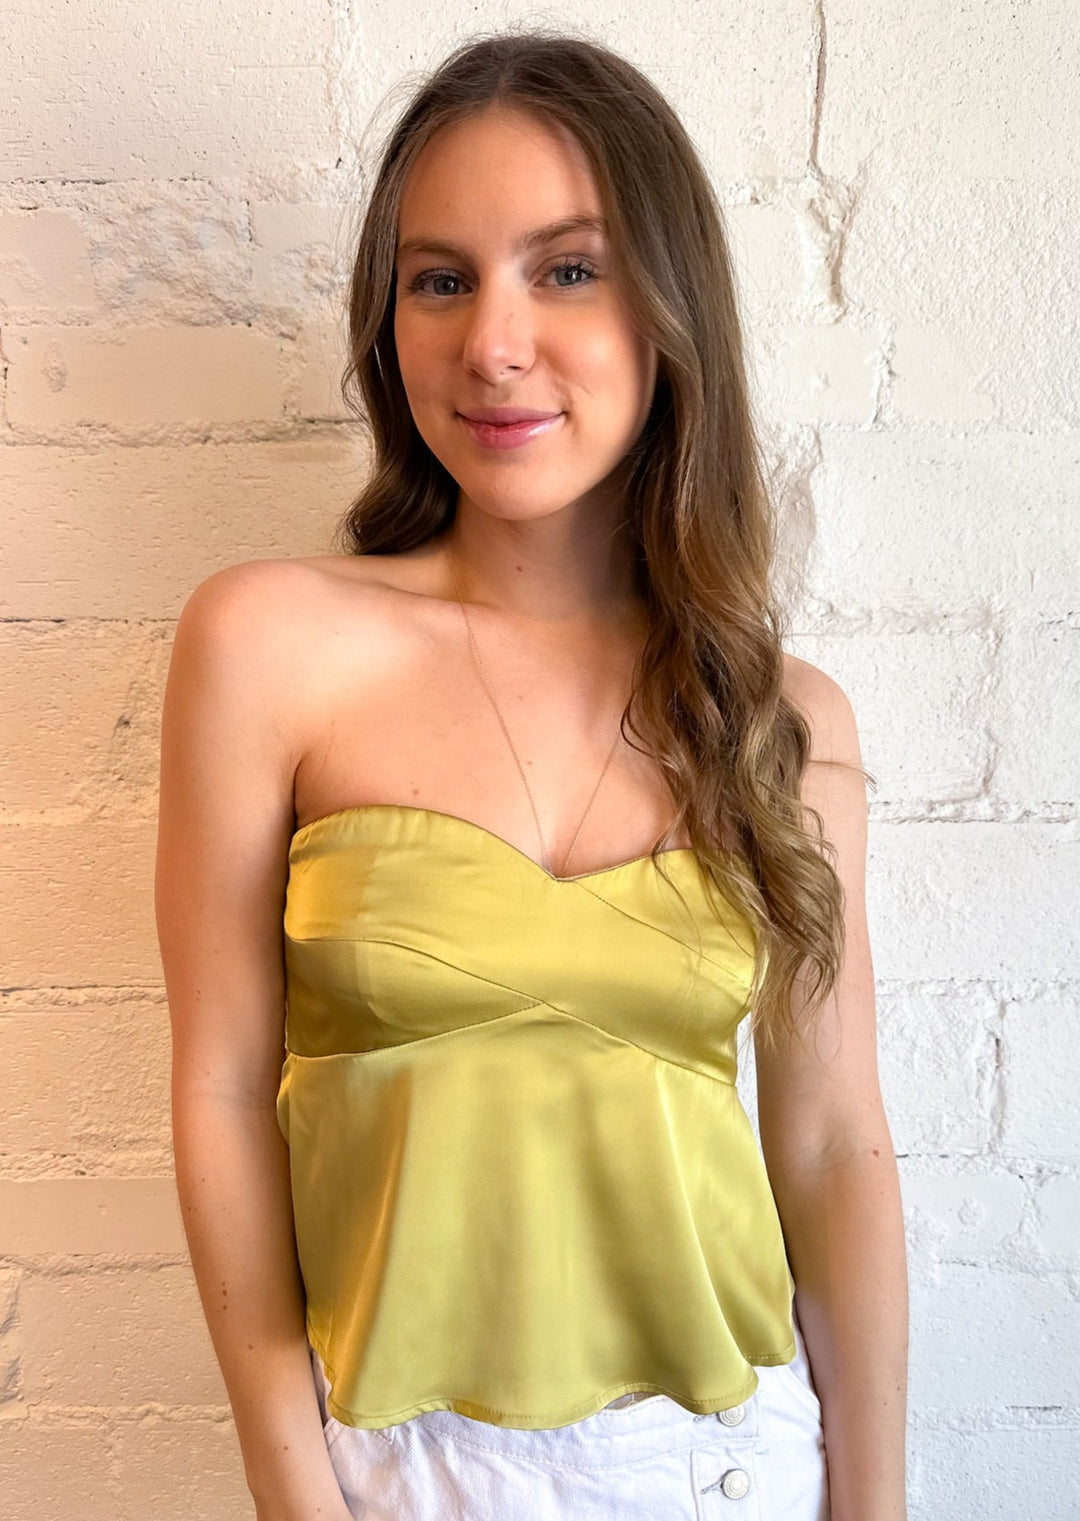 Holland Strapless Satin Top, Tops, Adeline, Adeline, dallas boutique, dallas texas, texas boutique, women's boutique dallas, adeline boutique, dallas boutique, trendy boutique, affordable boutique